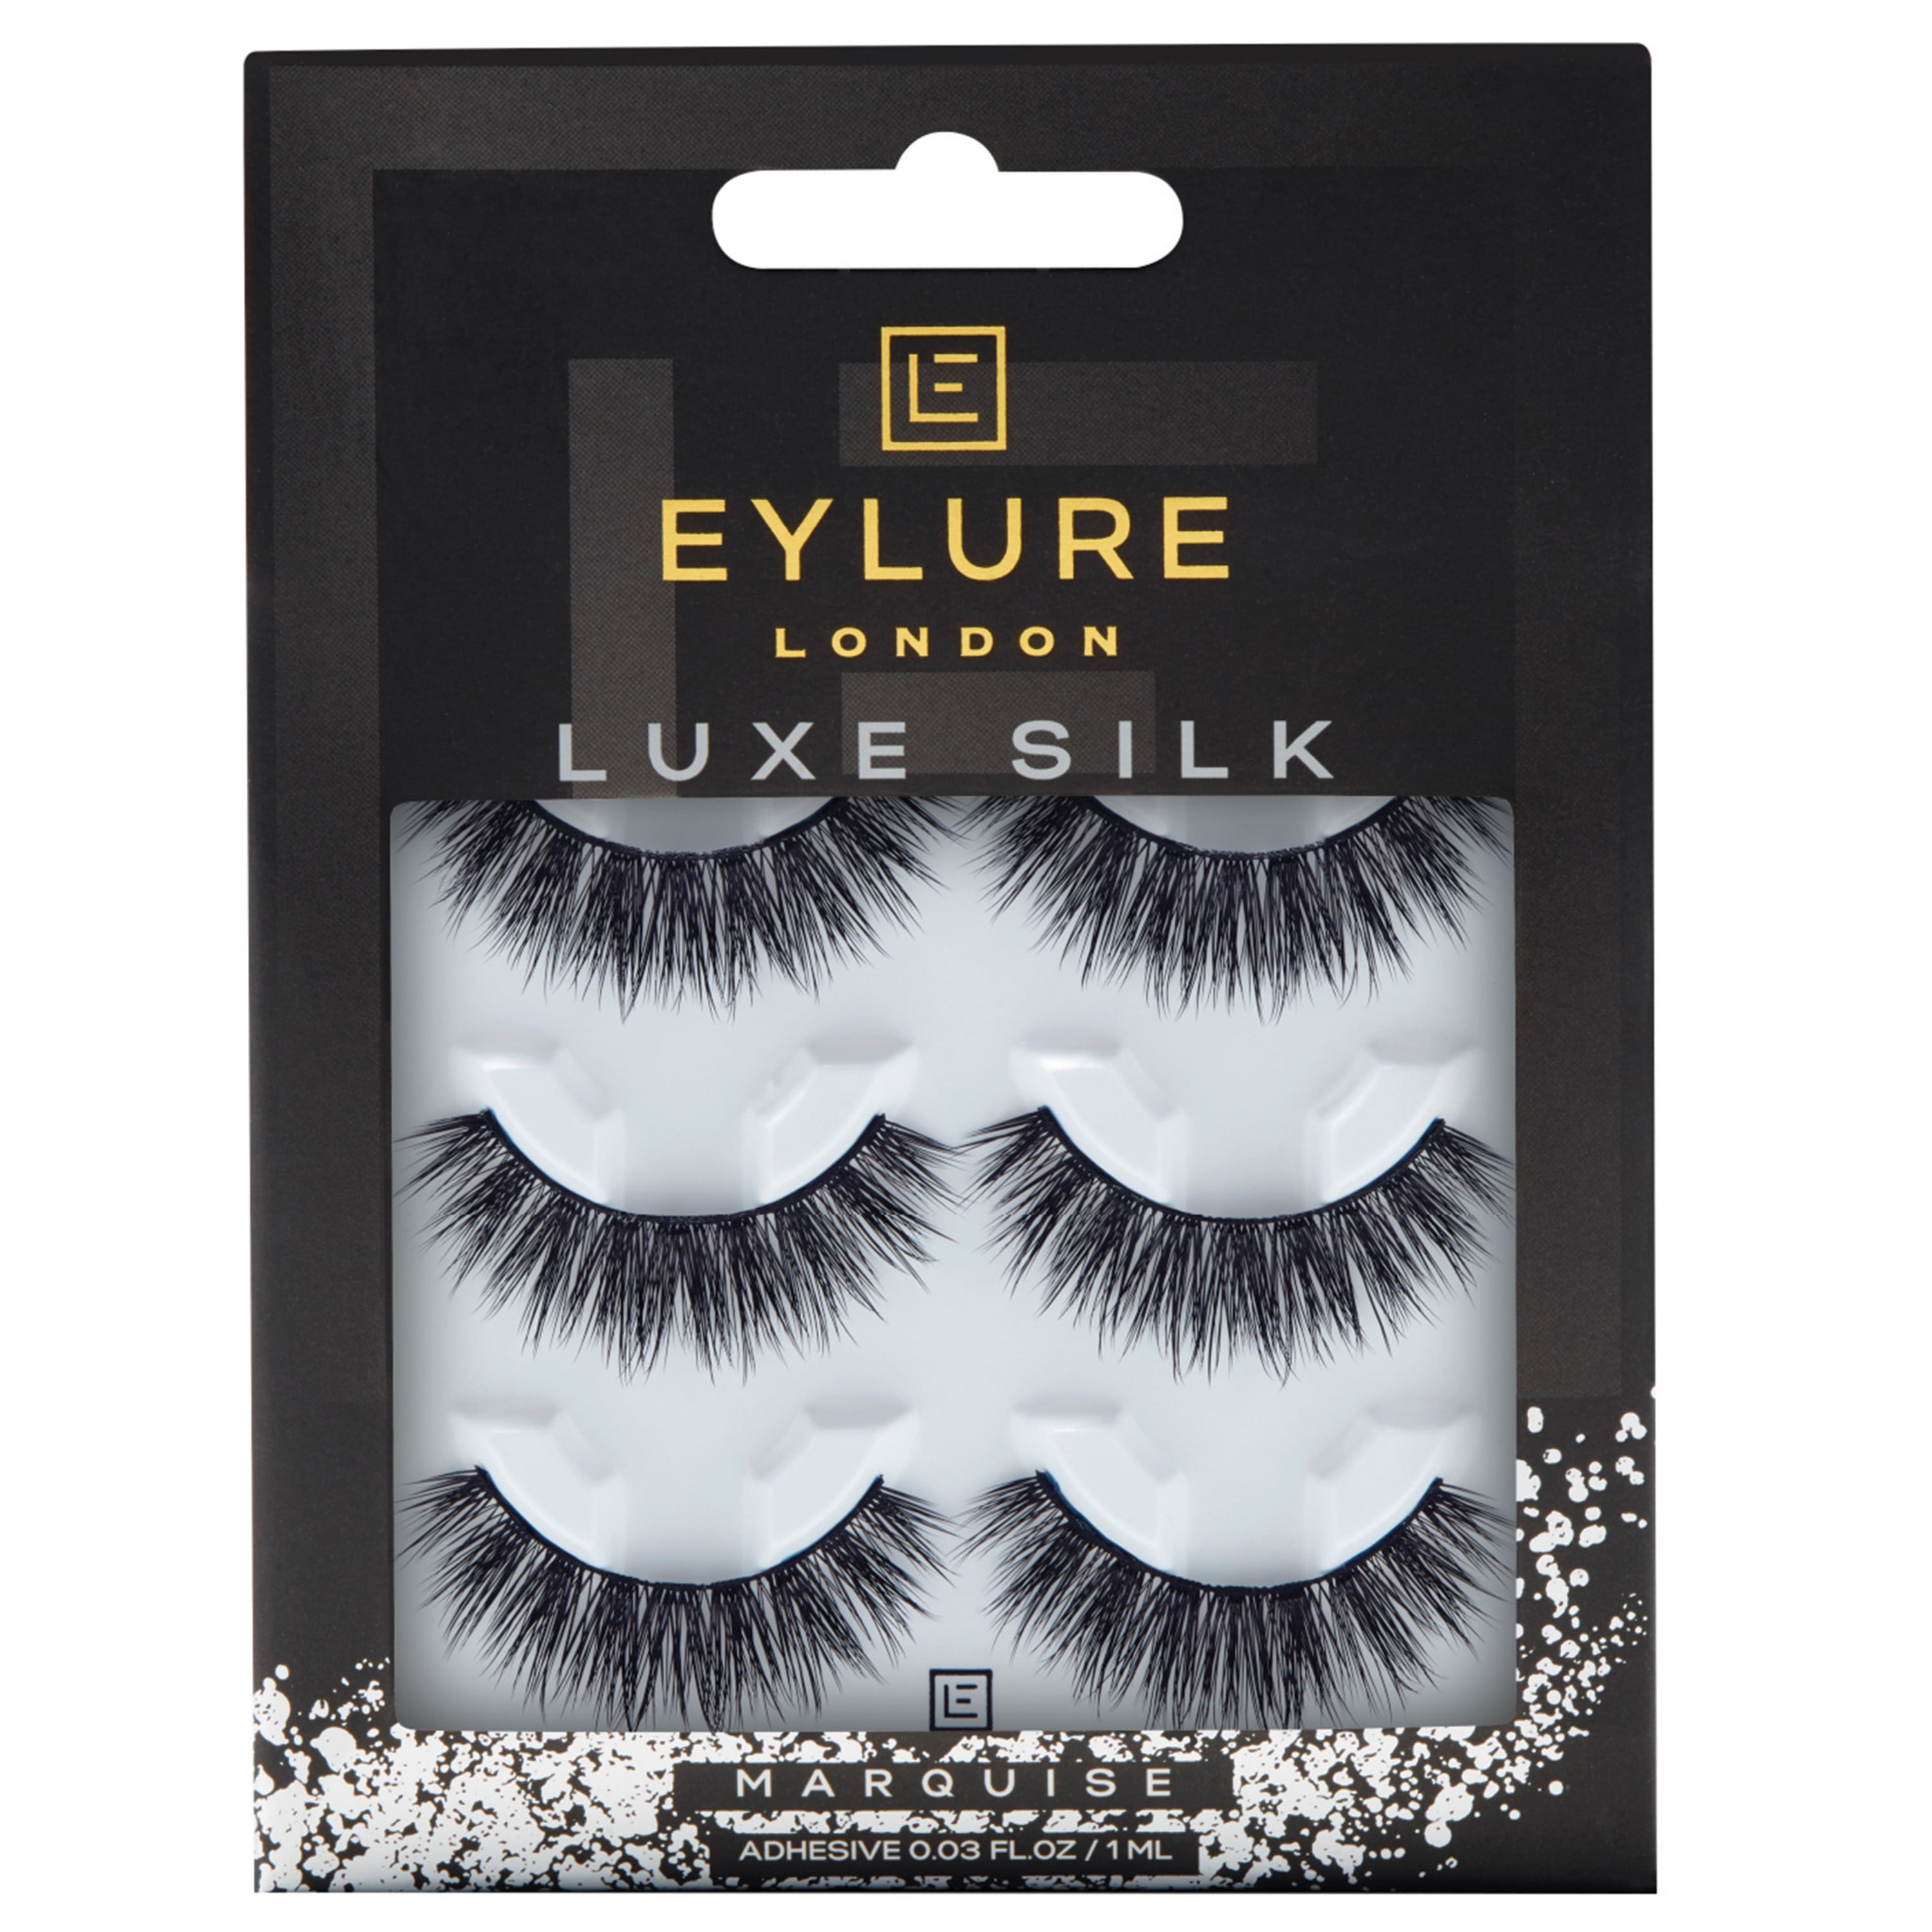 Eylure False Lashes, Luxe Silk Marquise with Adhesive Included, 3 Pair